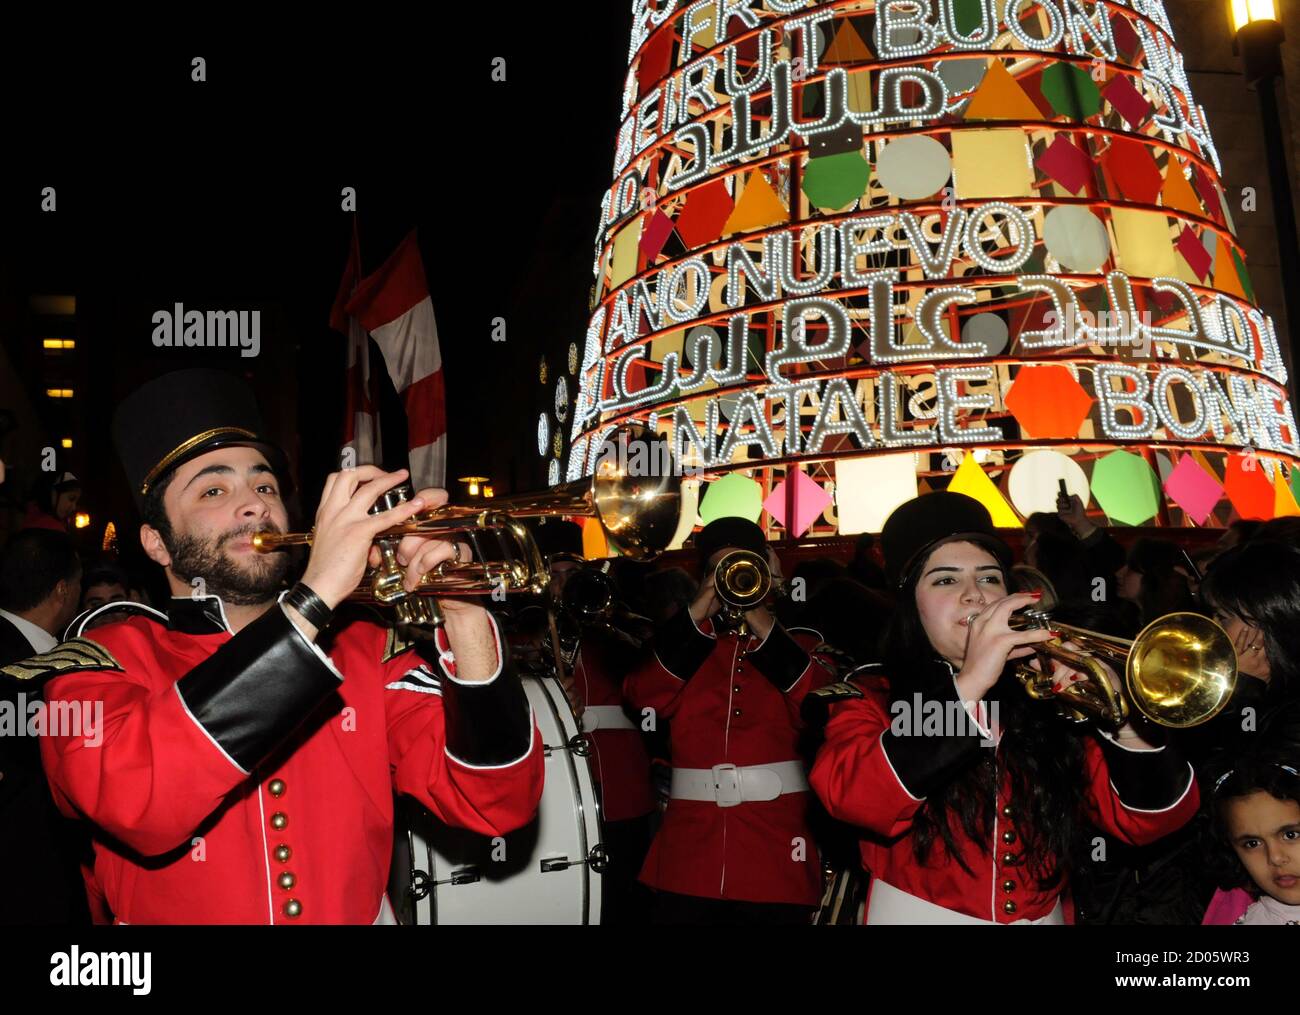 Musicians perform in front of a Christmas tree depicting the saying 'Merry Christmas and Happy New Year' in many languages, during the launch of 'Beirut Celebrates 2011' at a Christmas parade in downtown Beirut December 3, 2011. REUTERS/ Mohamed Azakir   (LEBANON - Tags: SOCIETY) Stock Photo